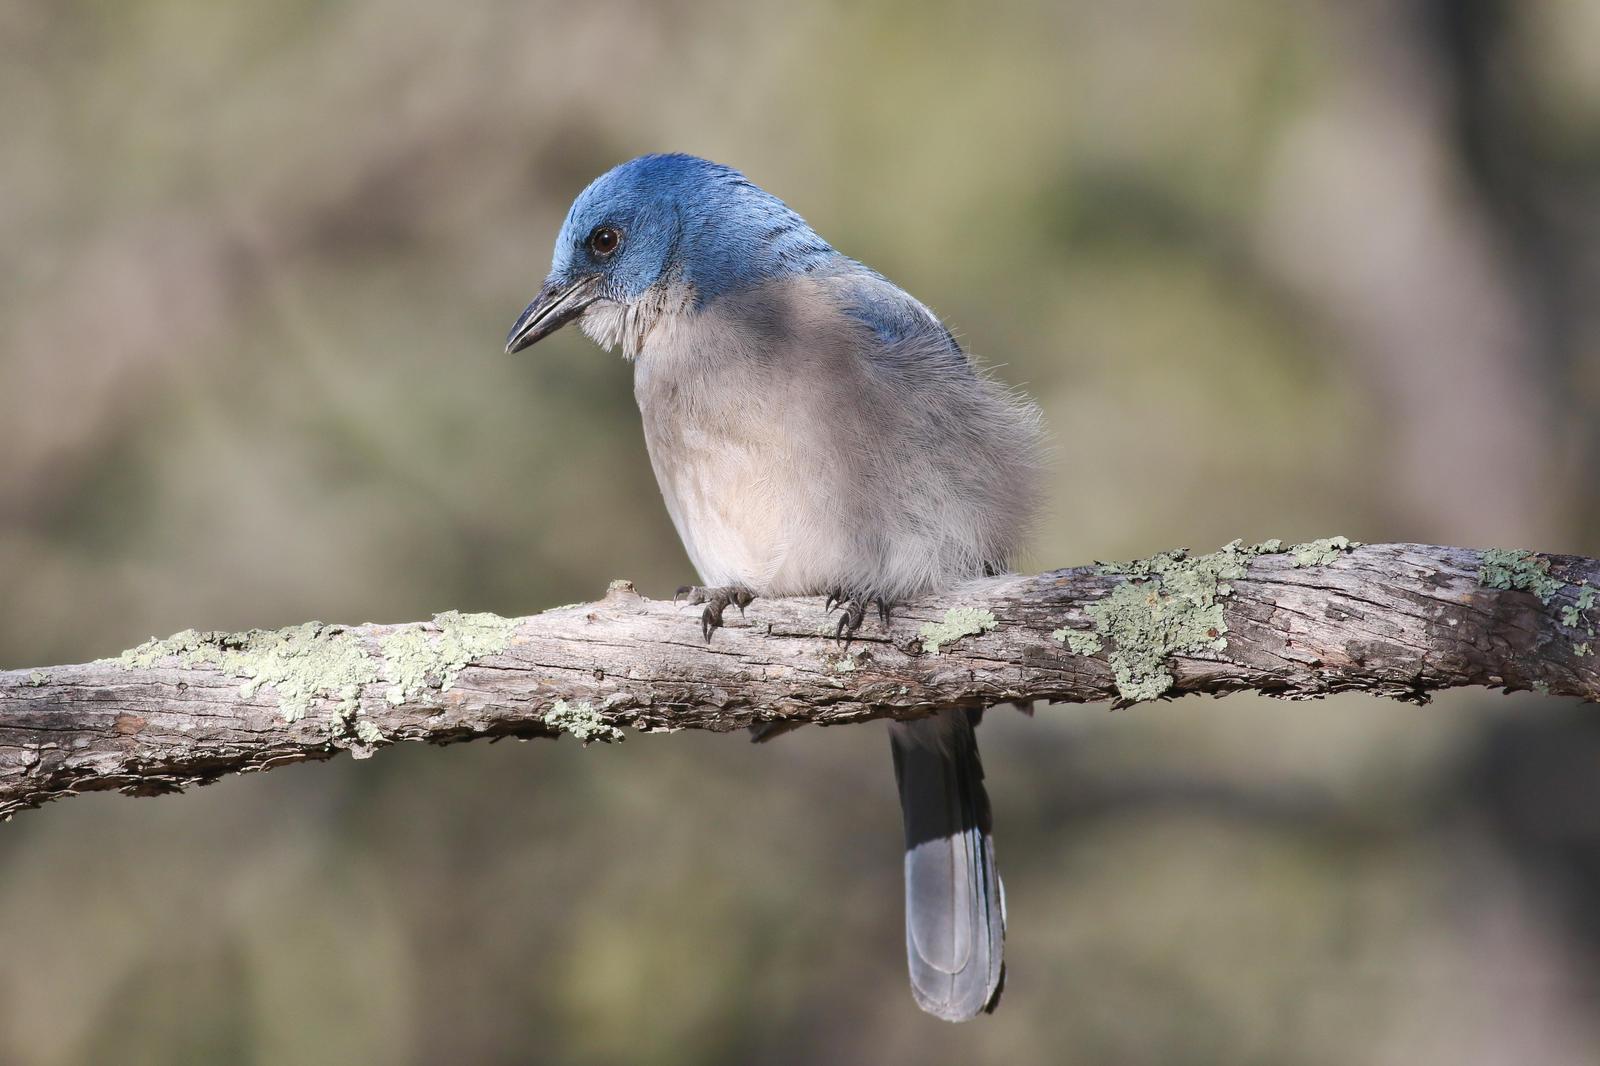 Mexican Jay Photo by Tom Ford-Hutchinson